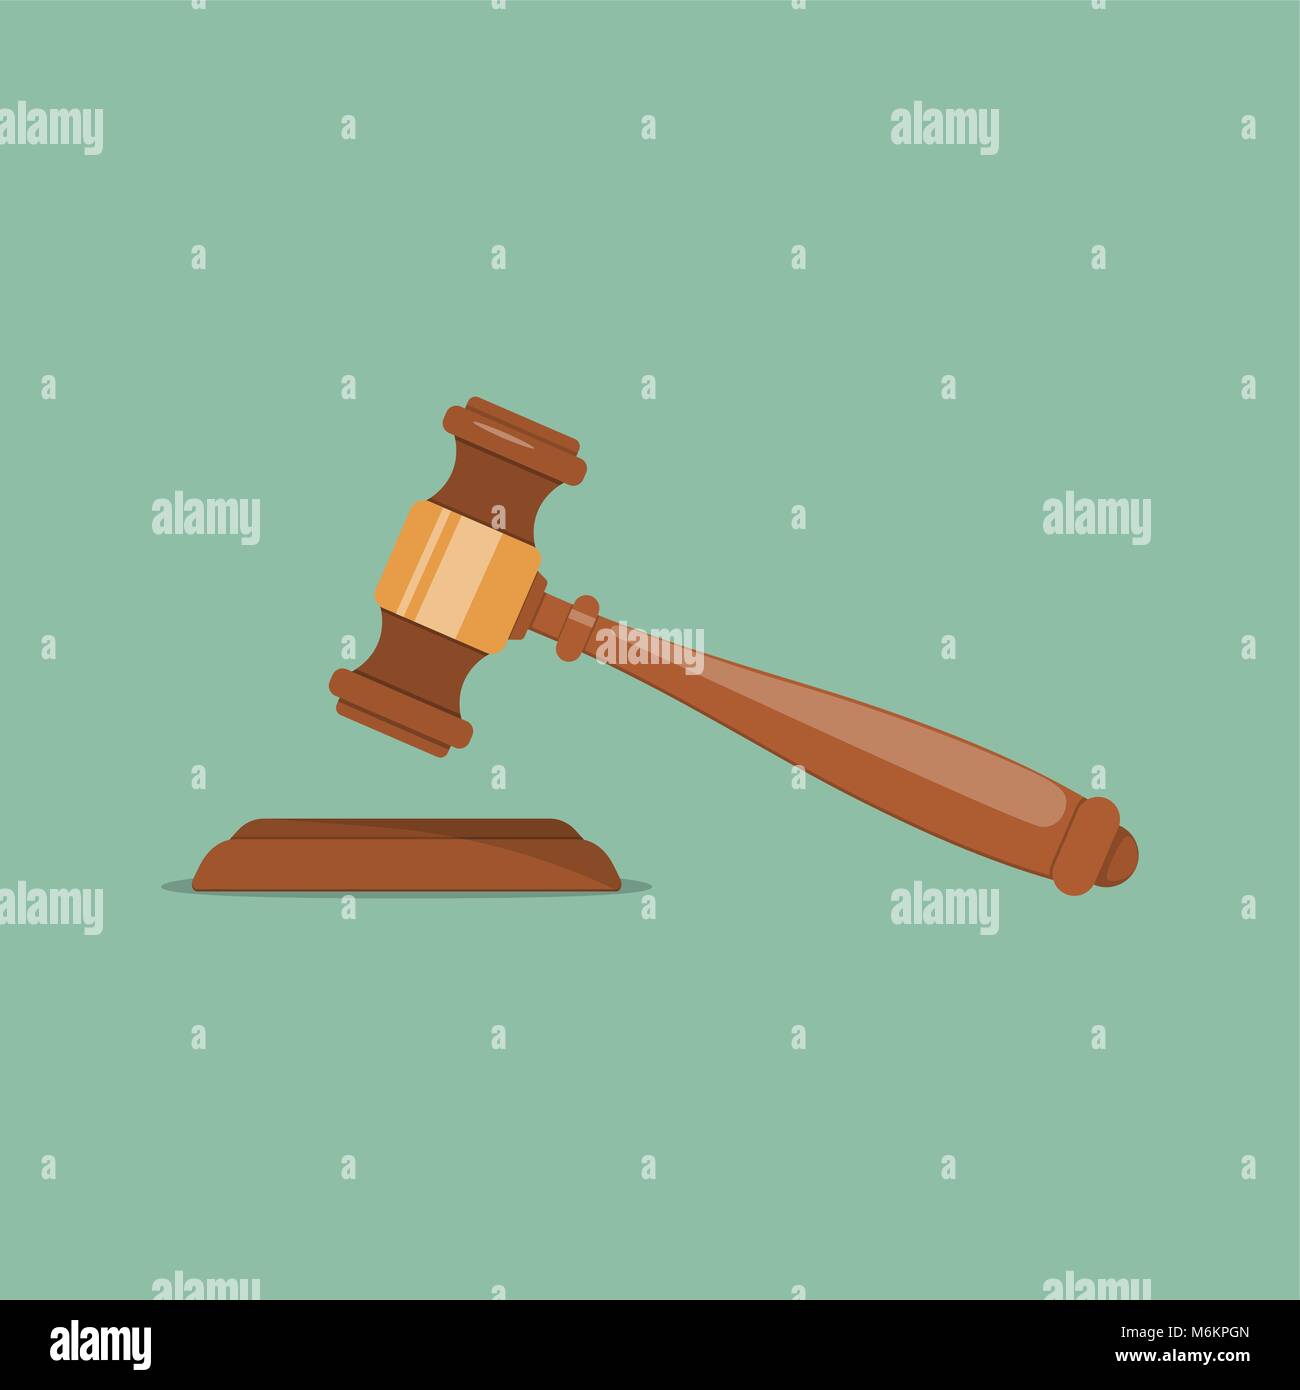 Gavel icon. Auction hammer. Shadow. Flat design. Vector illustration for your design Stock Vector